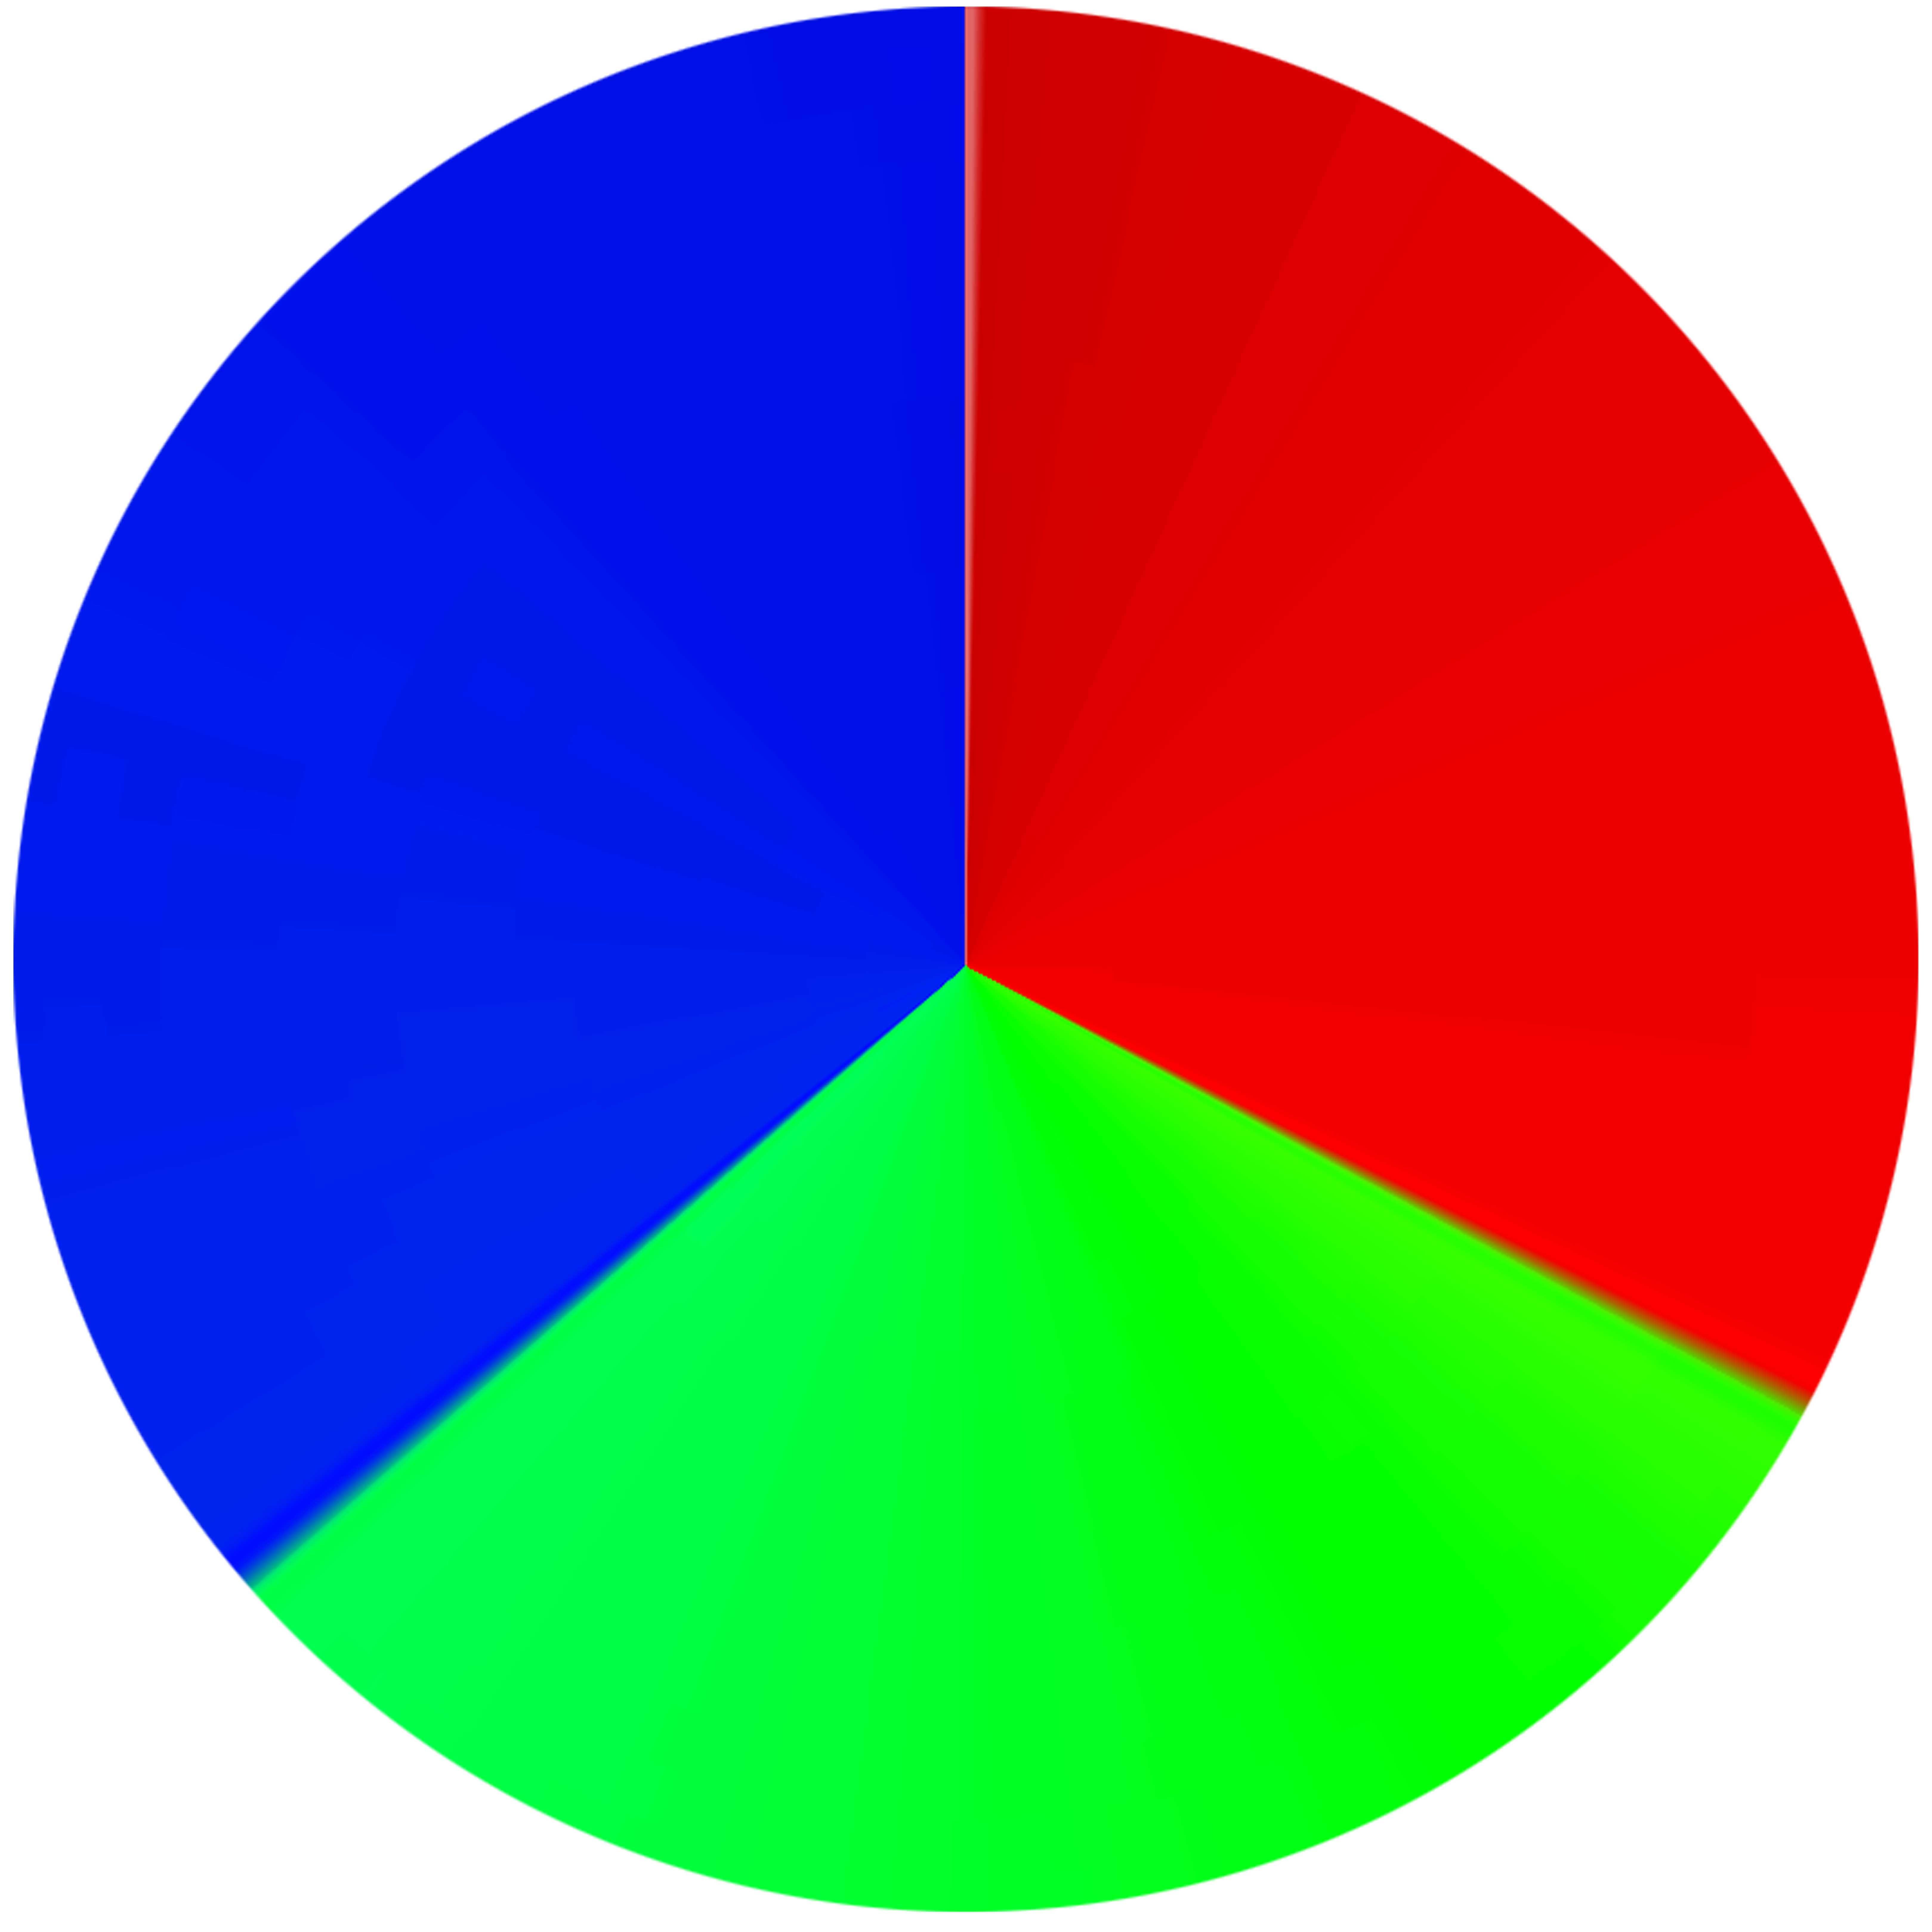 Green Blue Red Circle Logo - Newtons Color Wheel building one & operating one